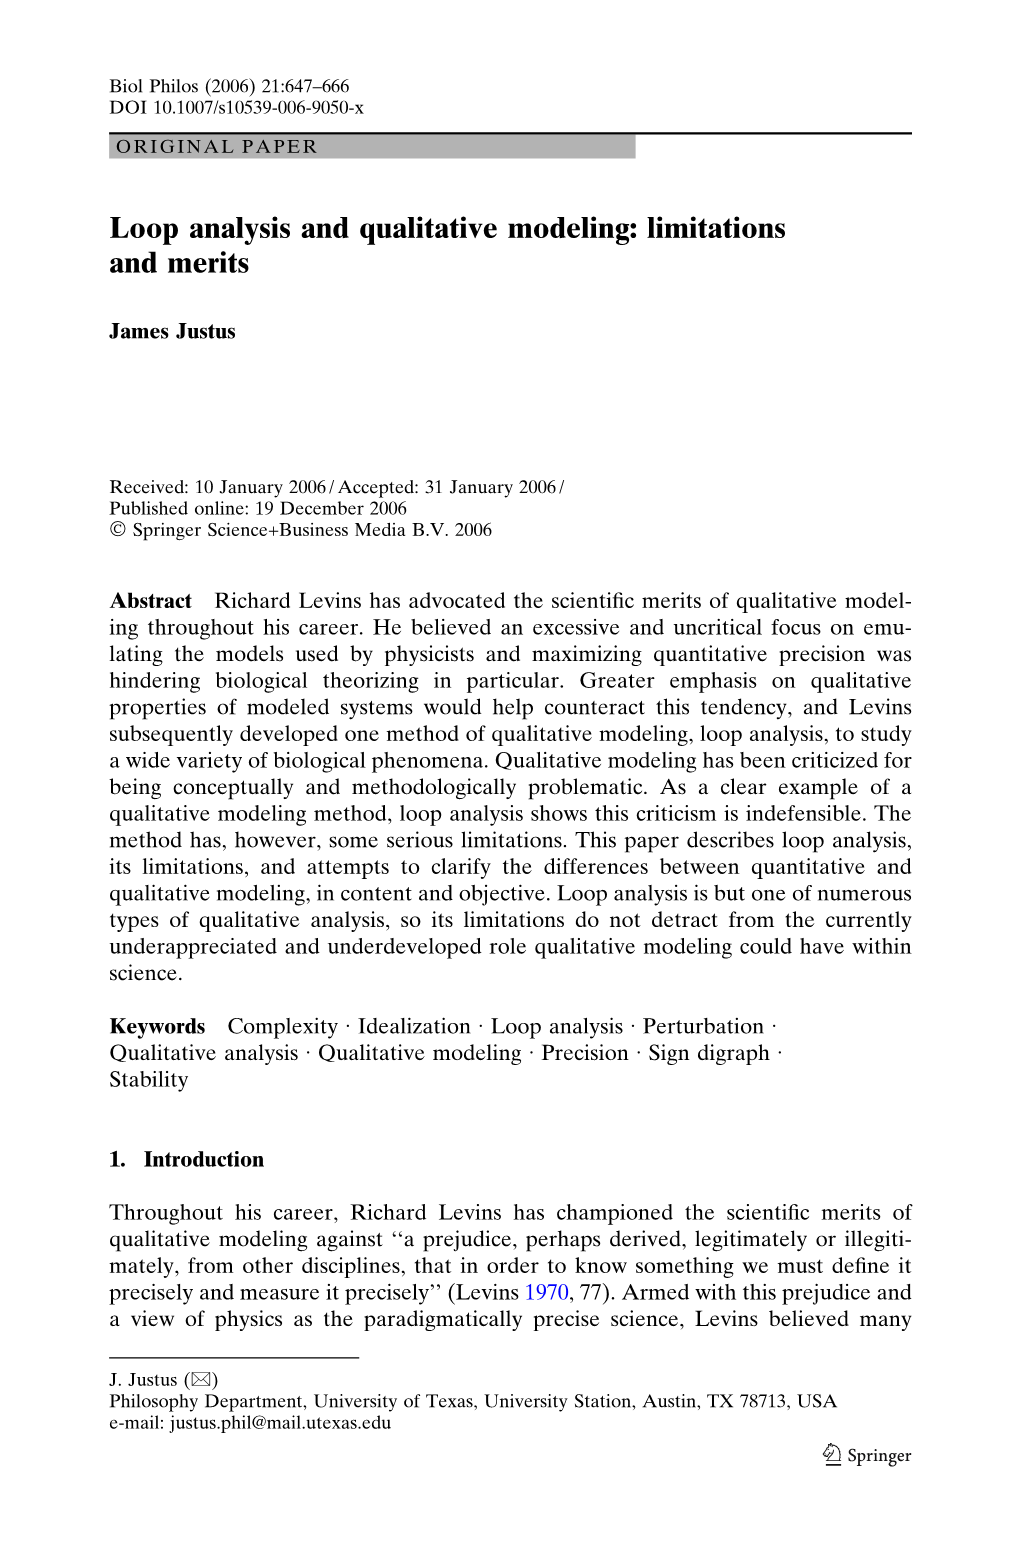 Loop Analysis and Qualitative Modeling: Limitations and Merits